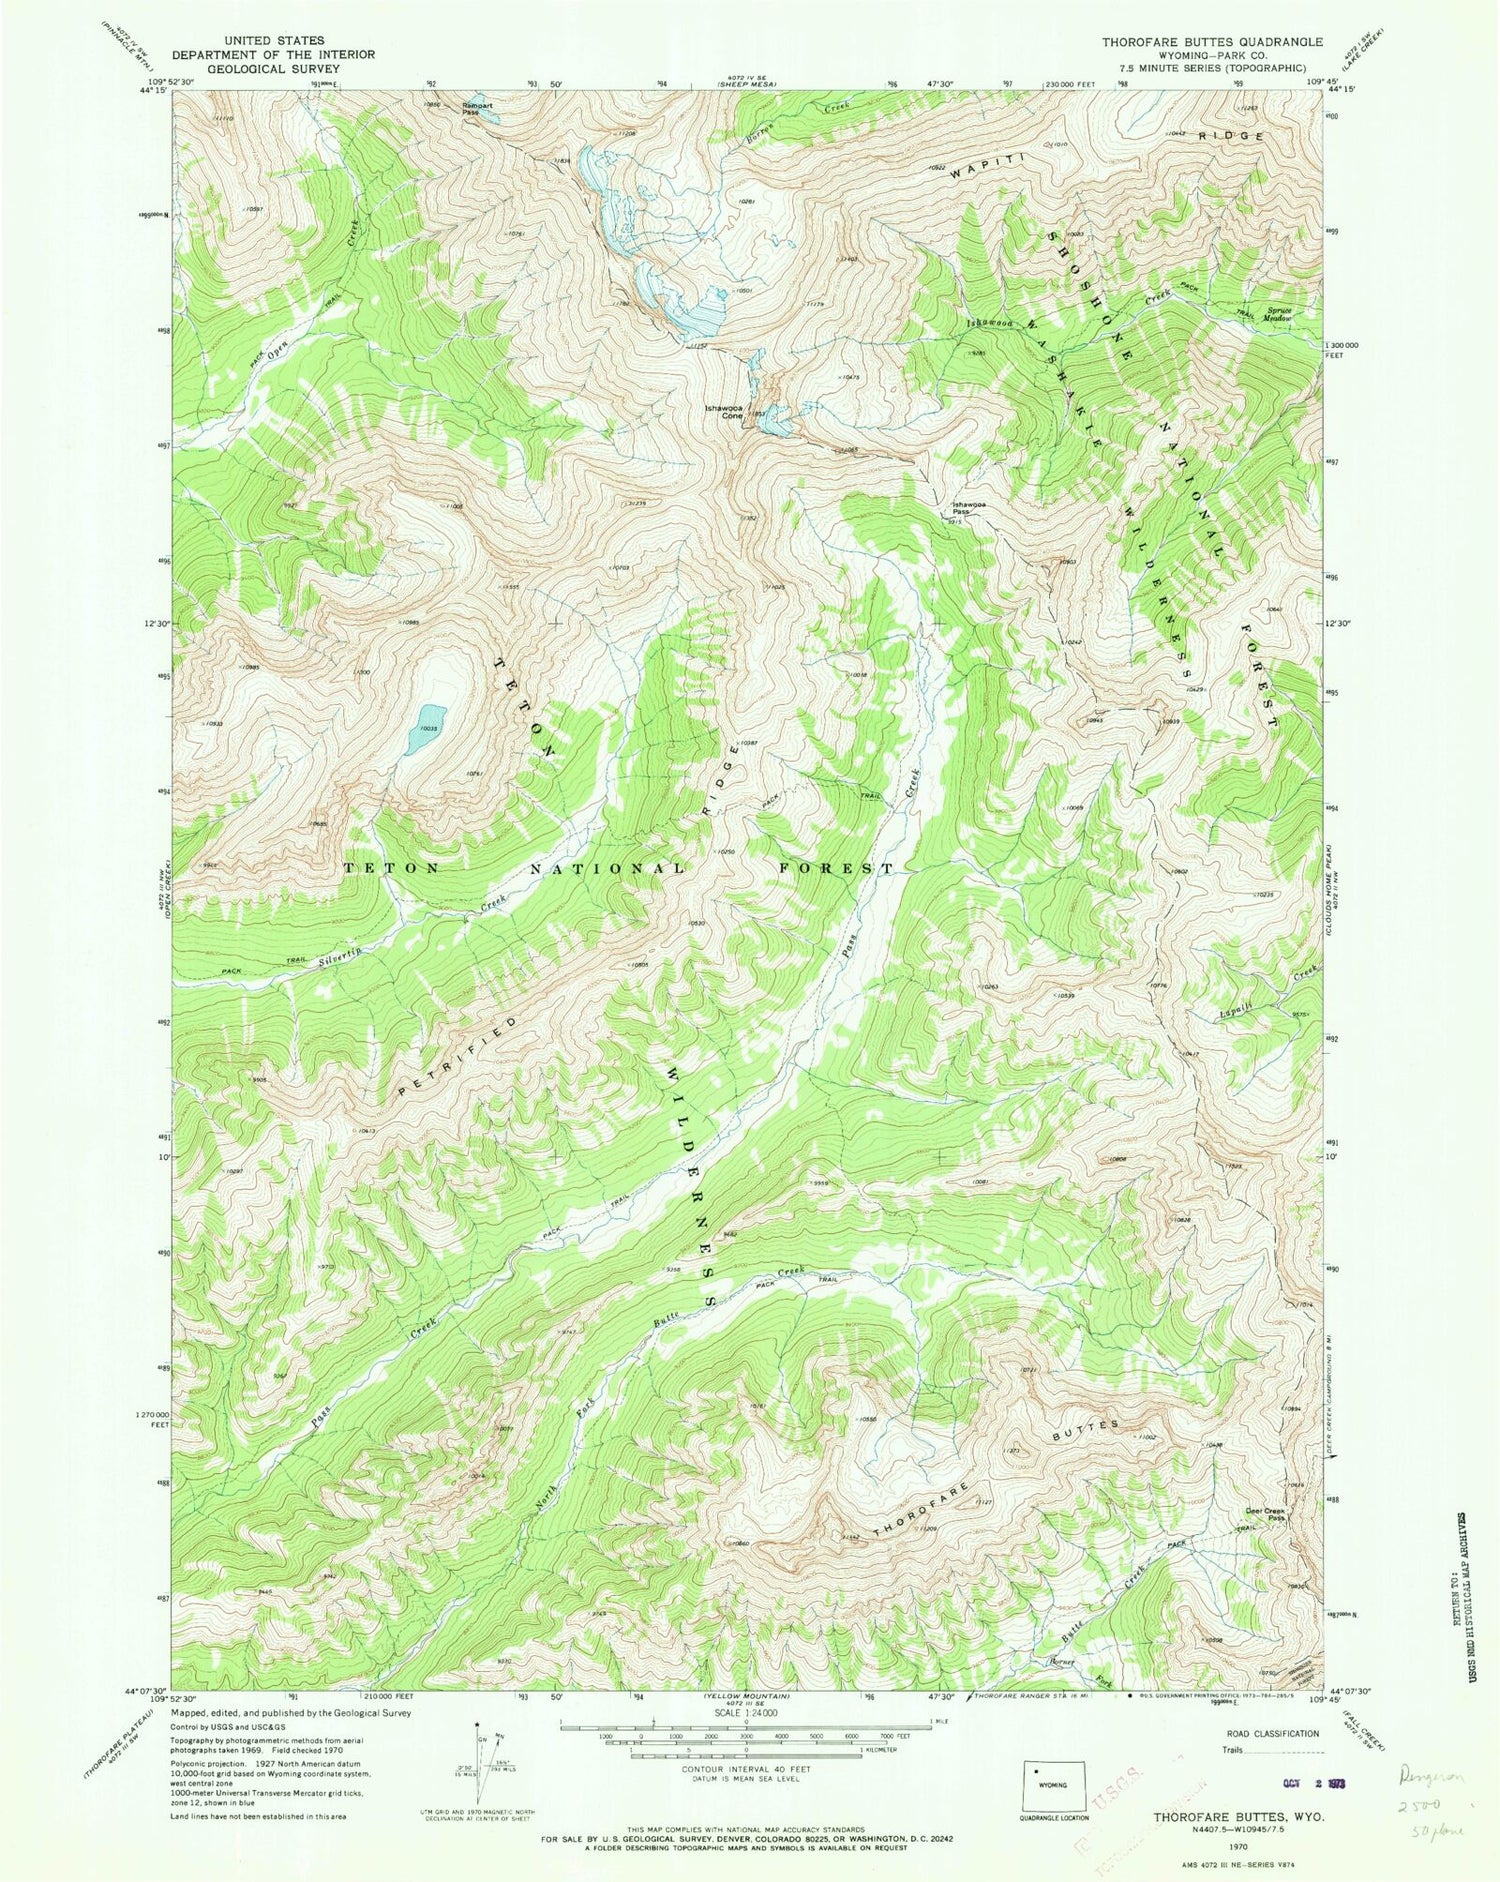 Classic USGS Thorofare Buttes Wyoming 7.5'x7.5' Topo Map Image